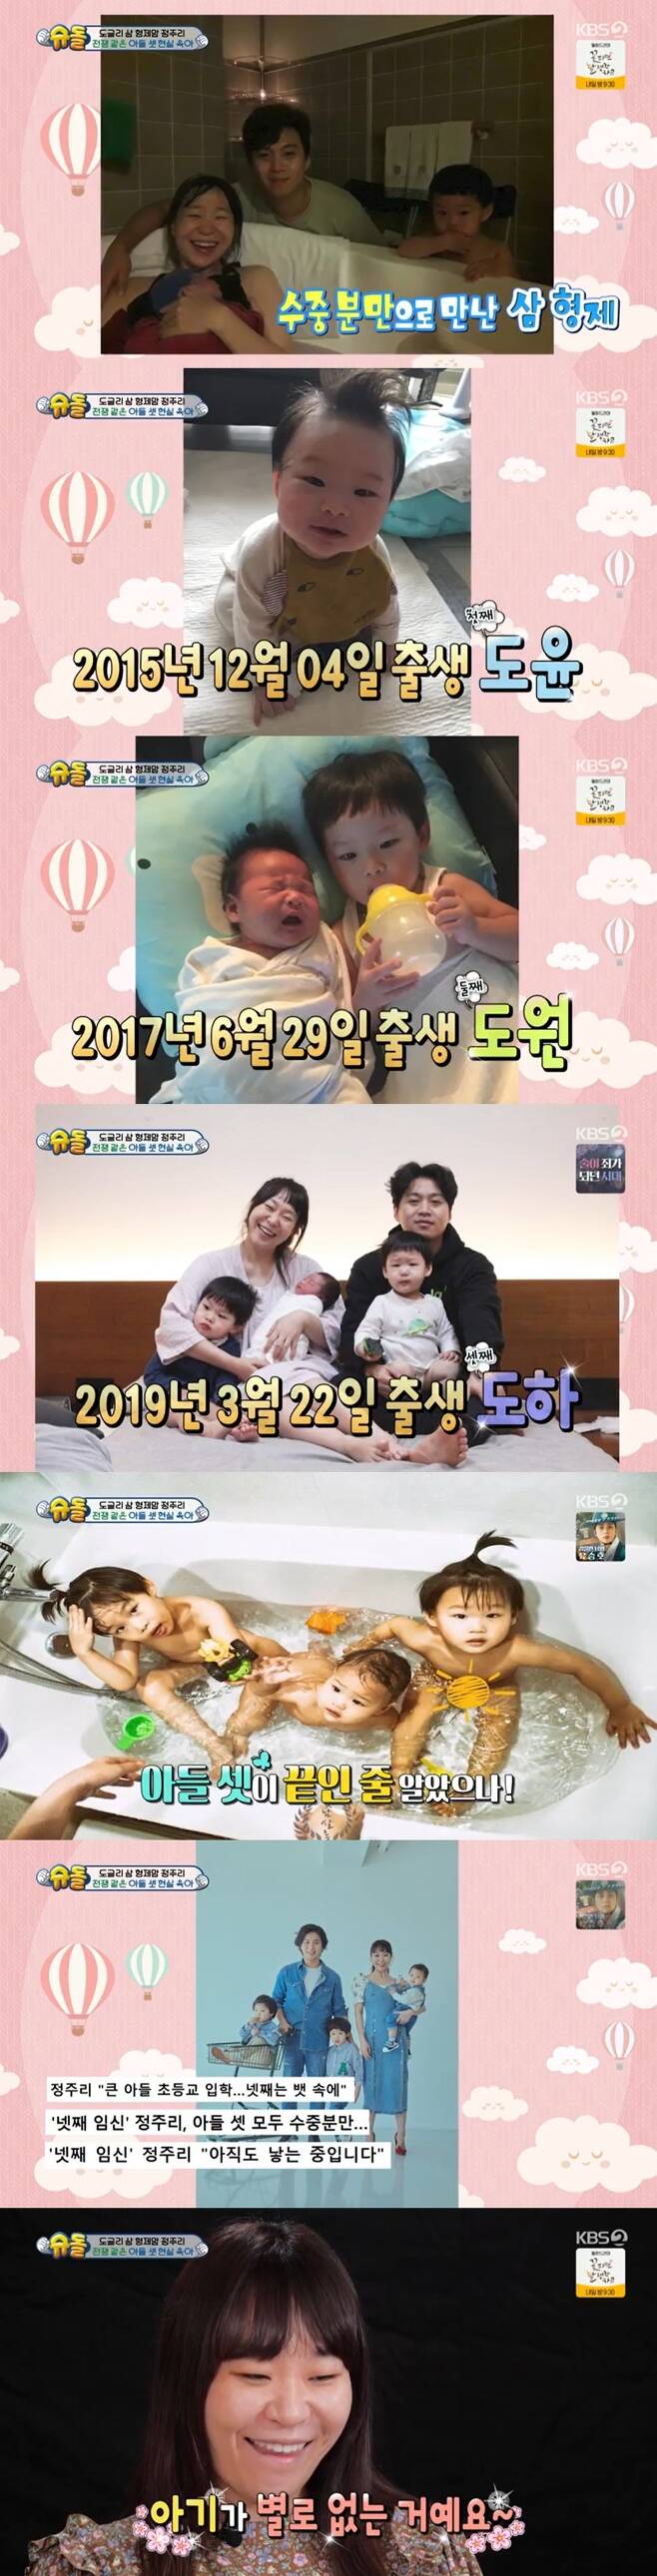 Comedian Jung Ju-Ri has released a warm-looking husband, cute threeson, on the air.Jung Ju-Ri joined KBS 2TV The Return of Superman on January 2 as a new super mom.Jung Ju-Ri, who had three sons, took a morning nutrient as soon as he woke up in the morning and ate it in a bite.Its my fourth mother Jung Ju-Ri, Ahn introduced herself: first Doyun in 2015, second help in 2017, and the youngest Doa in 2019, with only three sons.be six months pregnantJung Ju-Ri said: Its a start with a feeling of starting again, its all not in the plan, we talked about giving birth as you give it to your husband.We do not have much babies compared to what we love. 